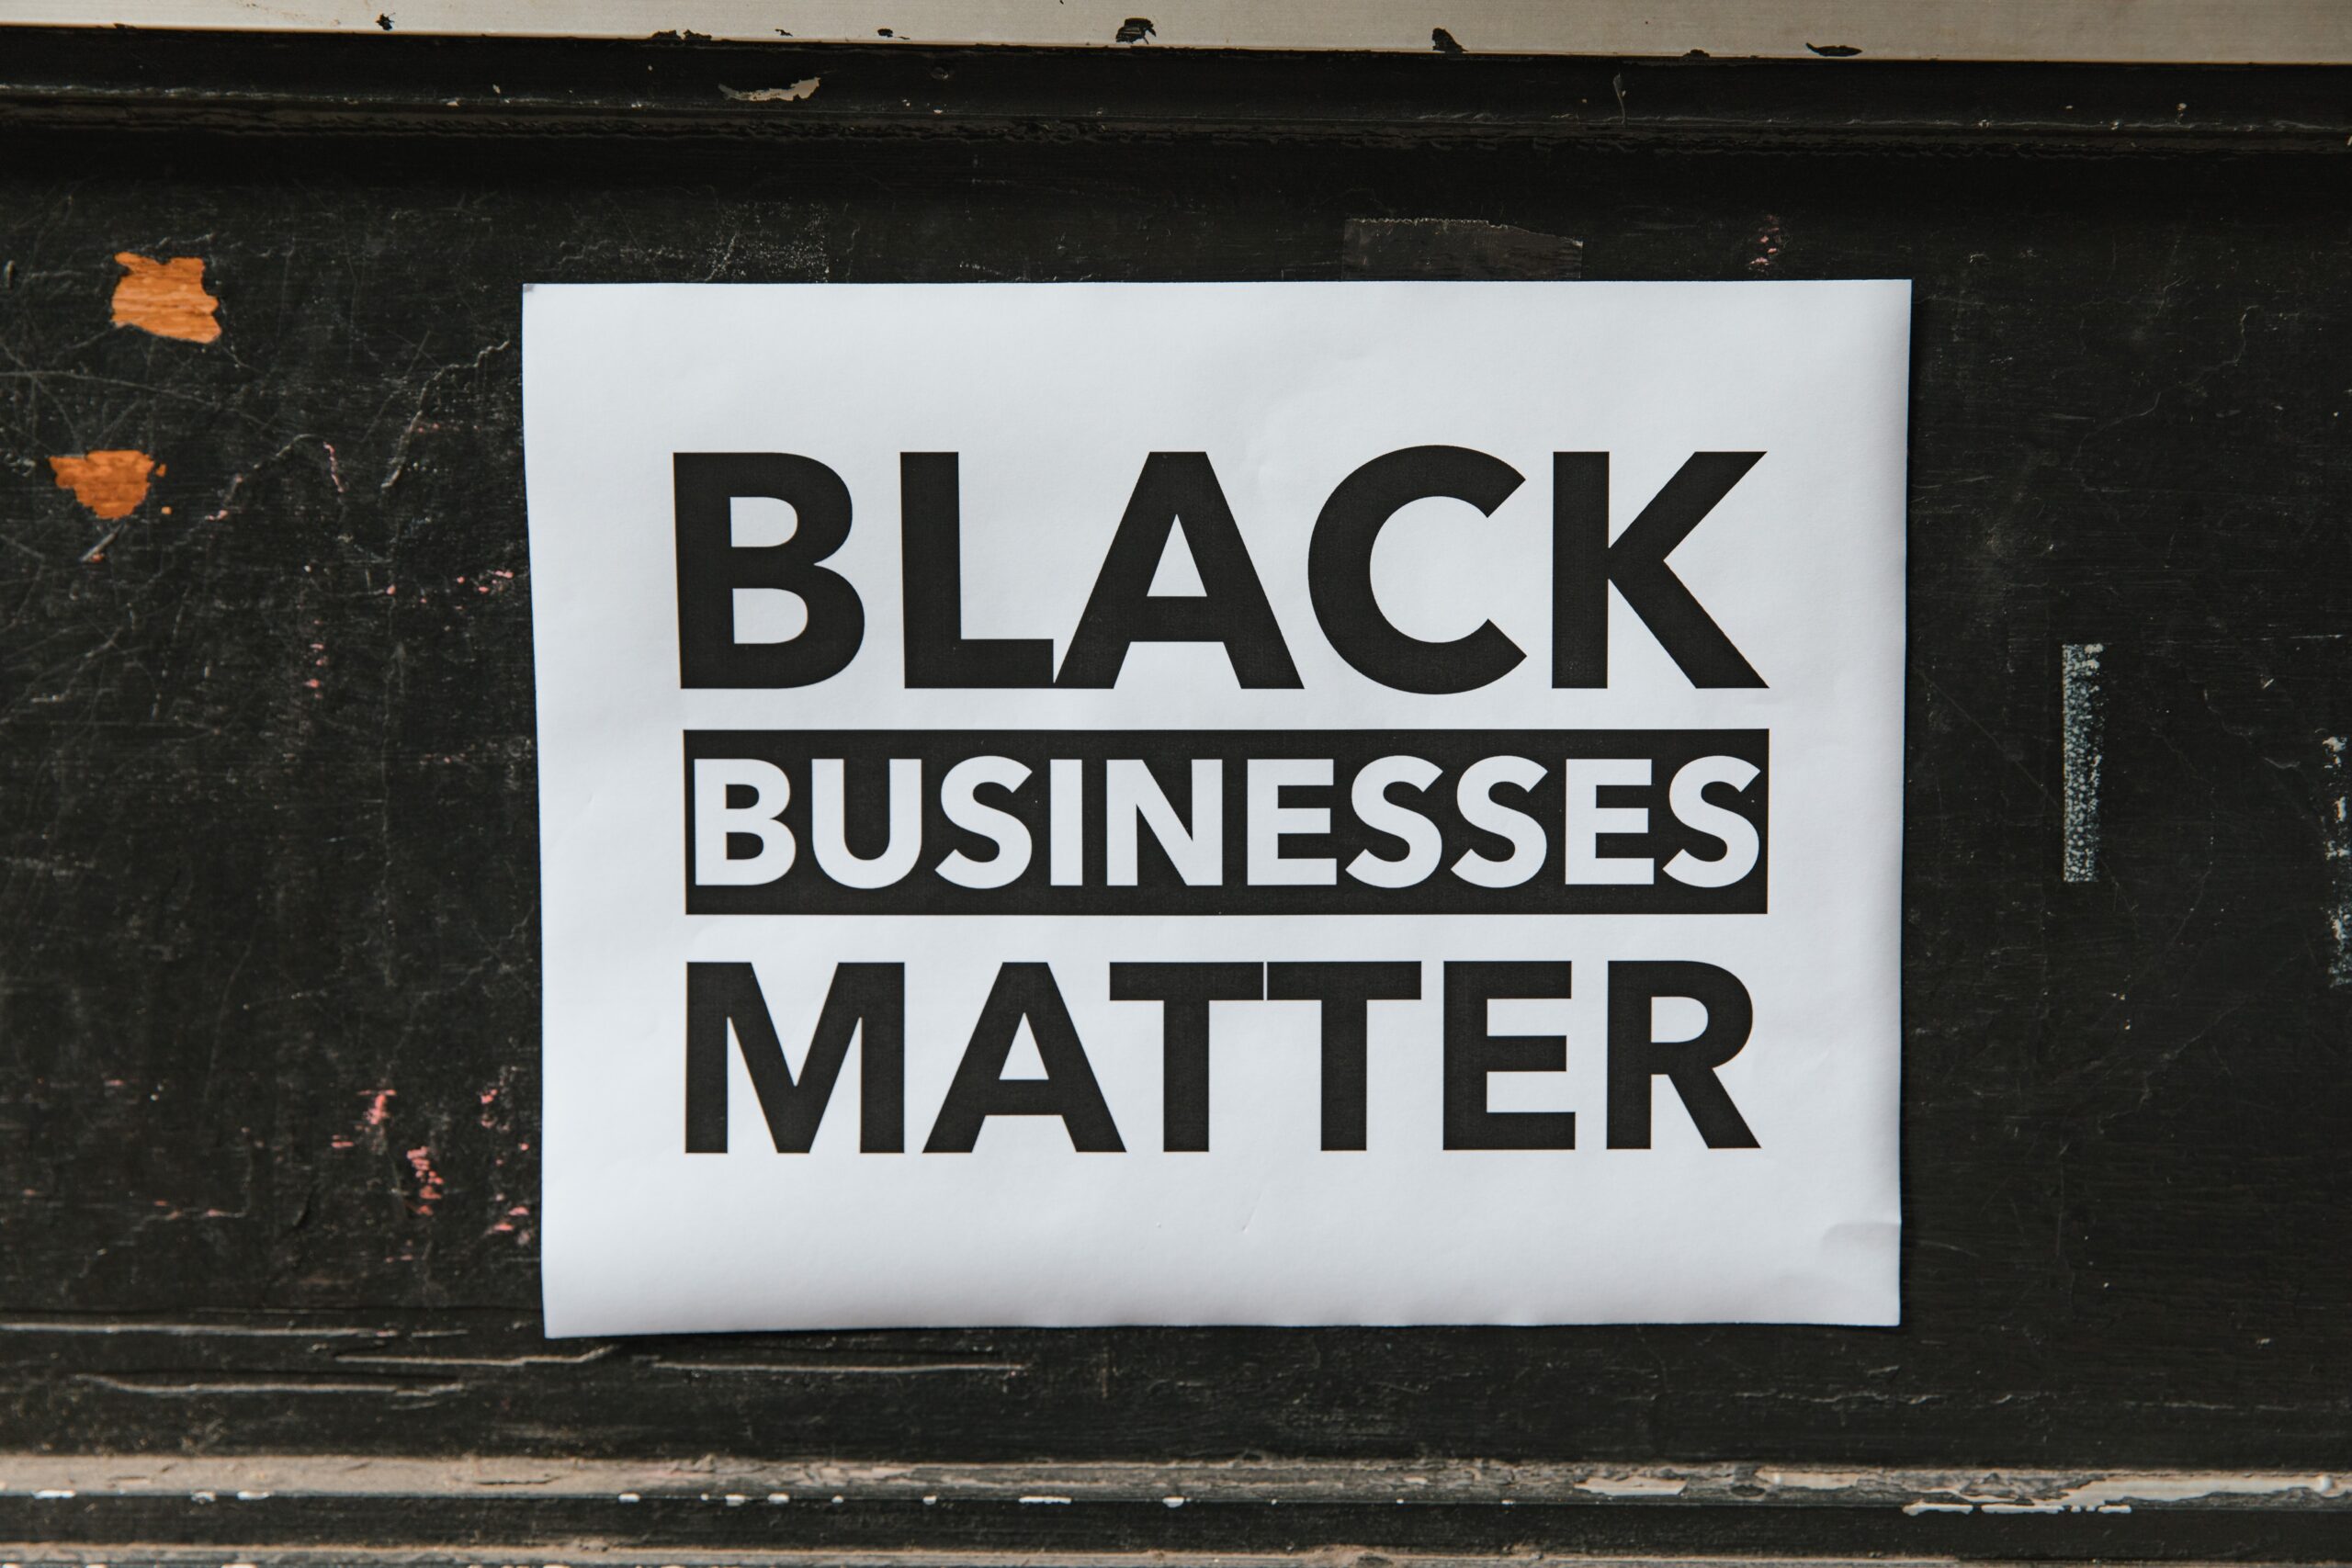 A door adorned with a sign celebrating Black-owned businesses in honor of Black-Owned Business Month.